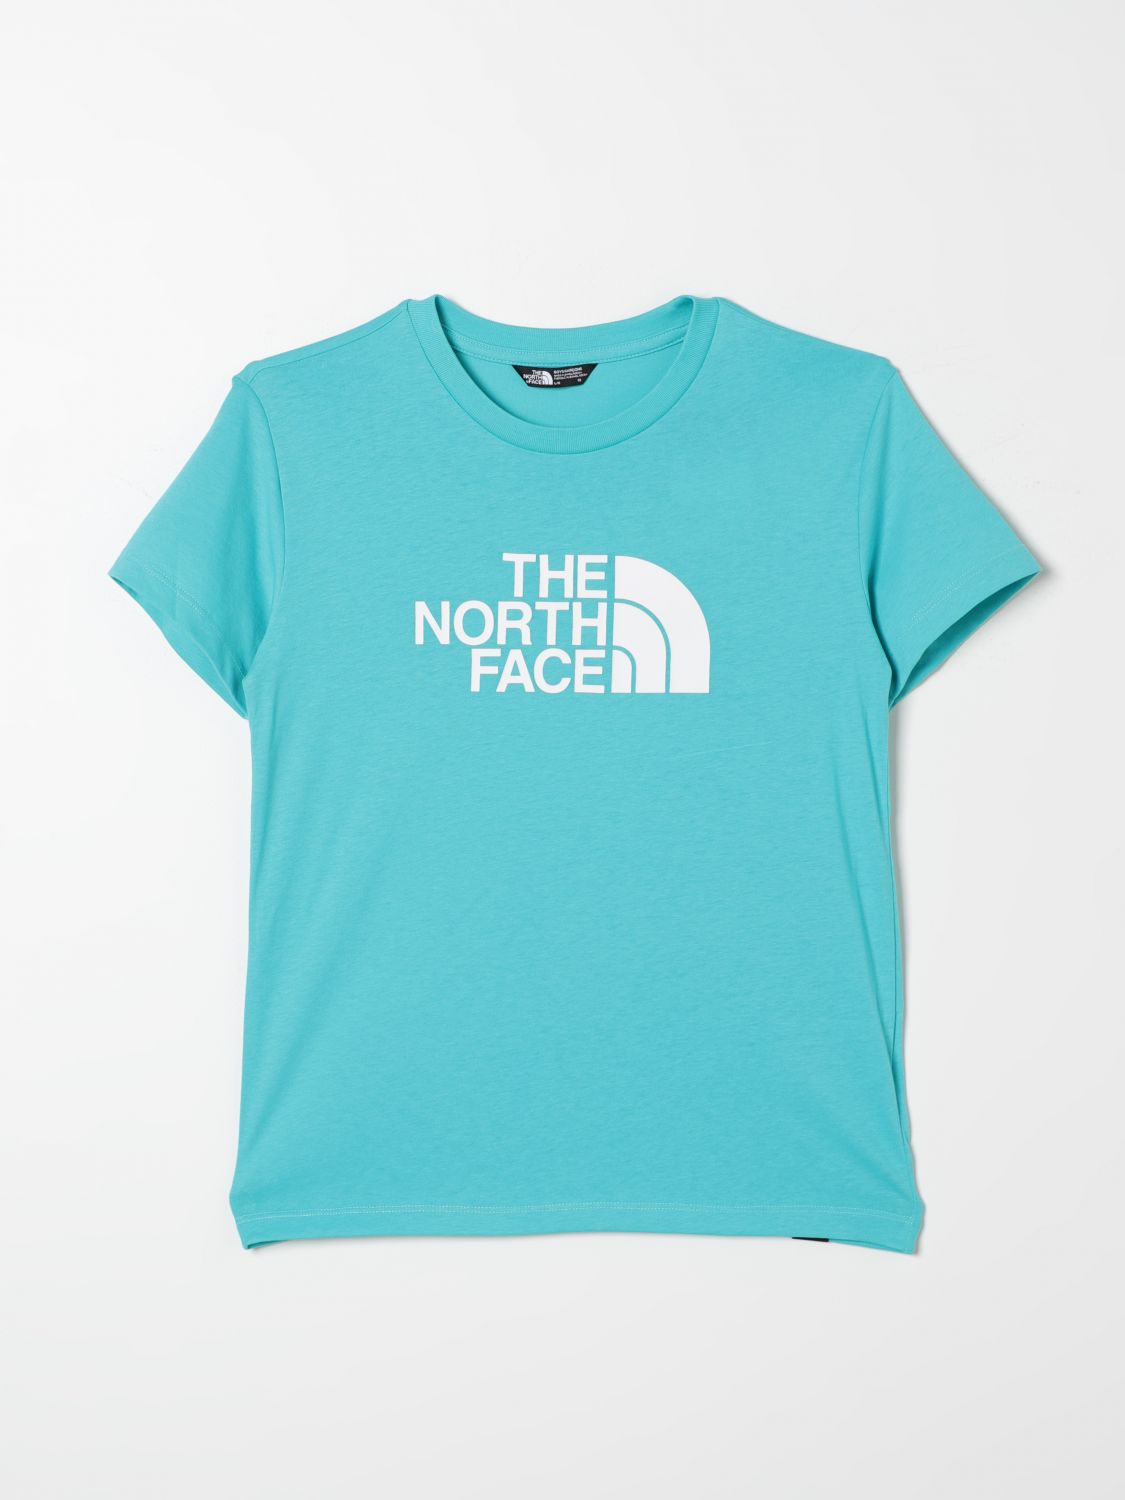 The North Face T-Shirt THE NORTH FACE Kids color Blue